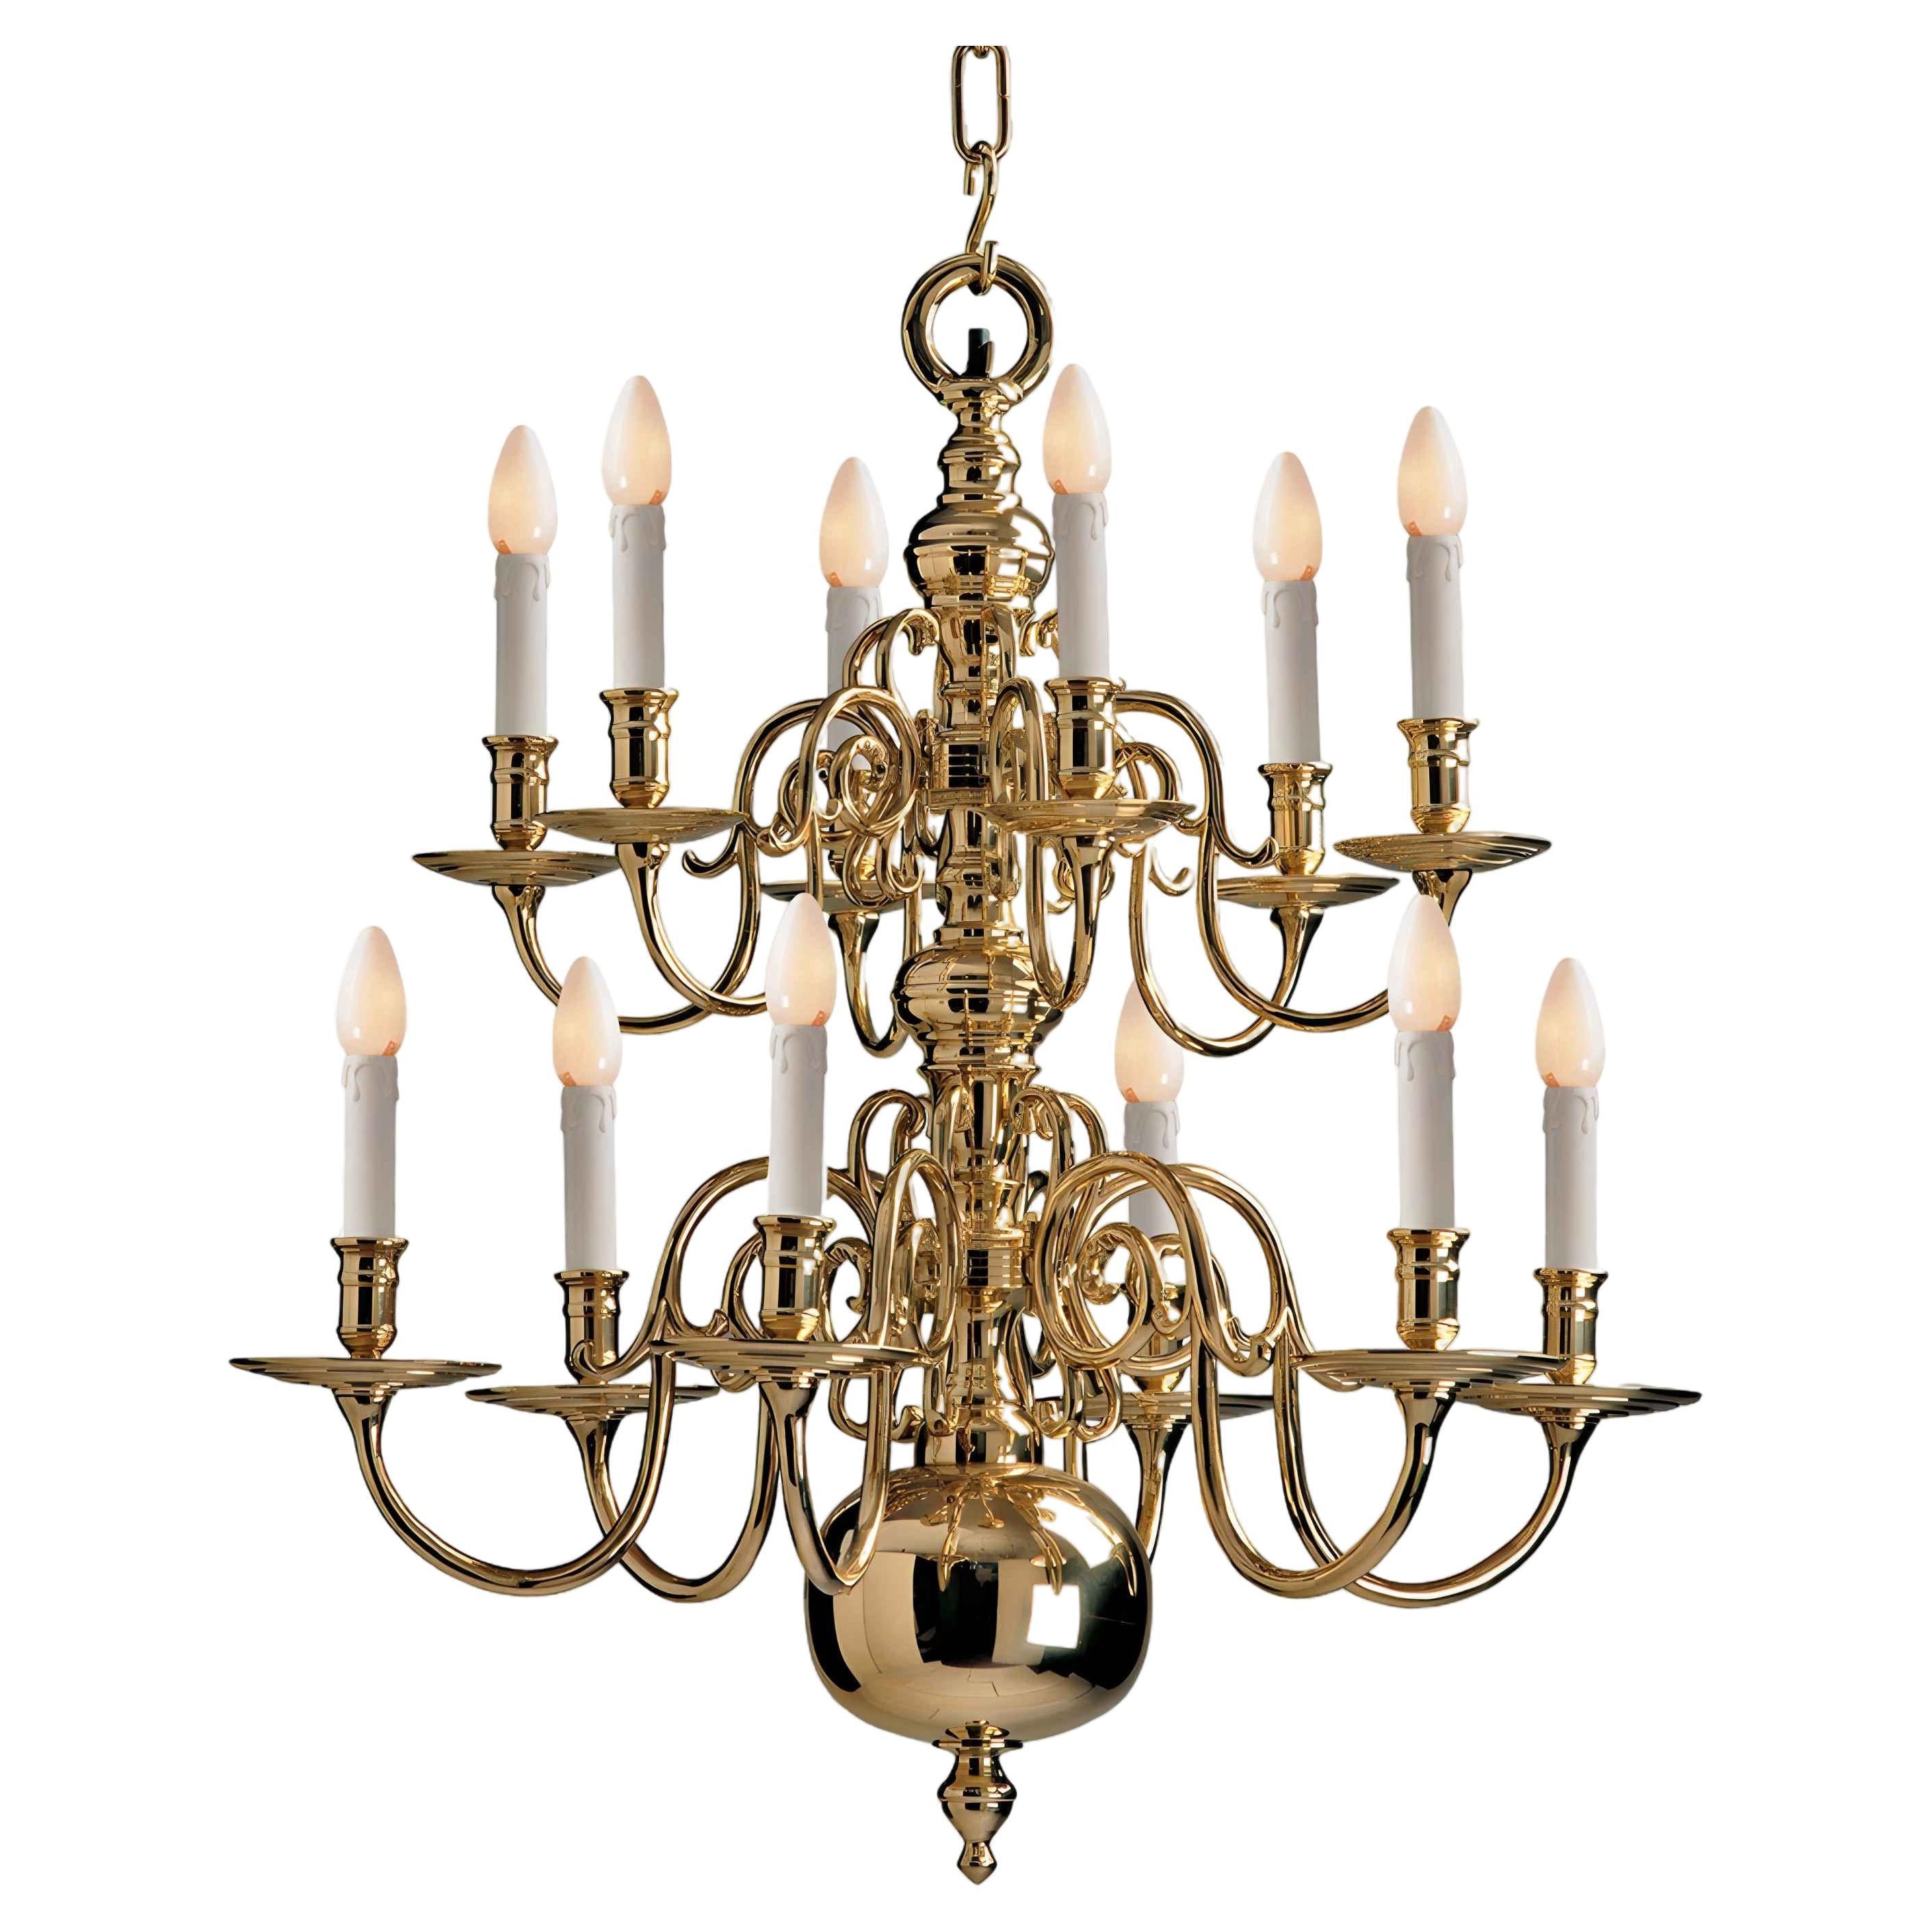 2 Tier 17th Century Electric Model Dutch Brass Chandelier with 12 Lights H80xW77 For Sale